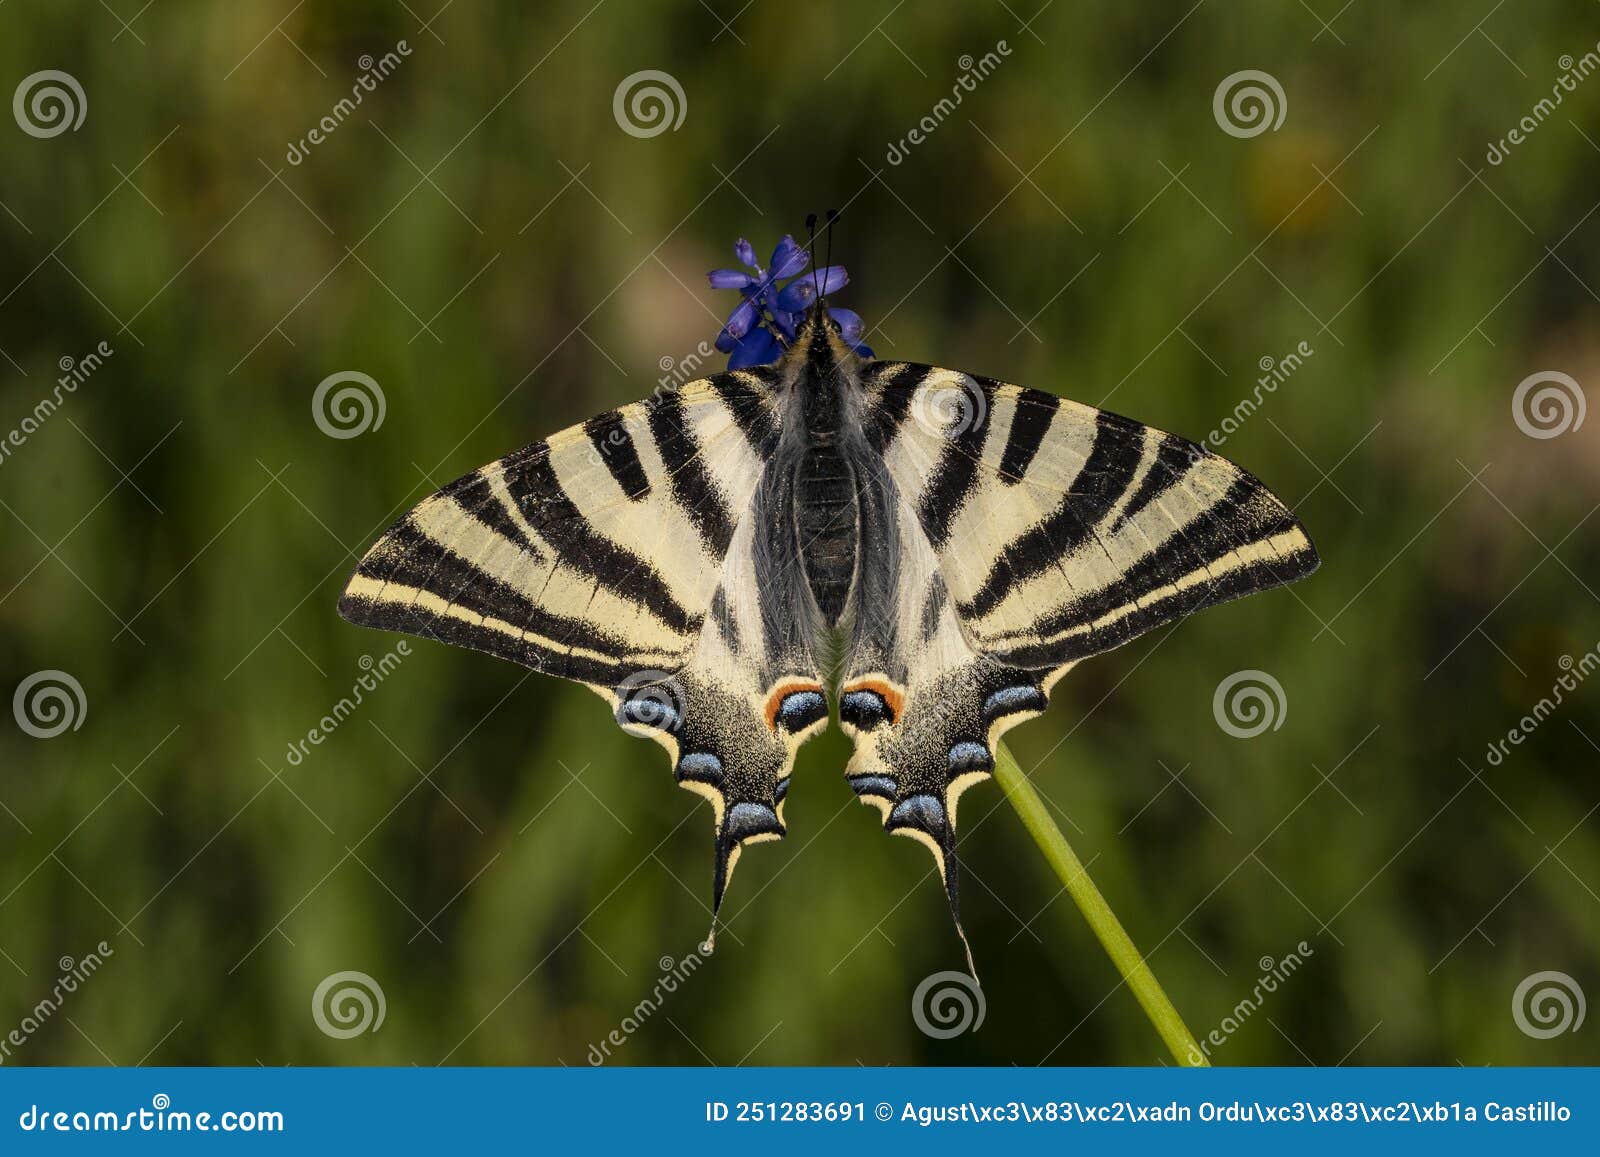 iphiclides feisthamelii or the milksucker, is a species of lepidoptera ditrisio of the family papilionidae